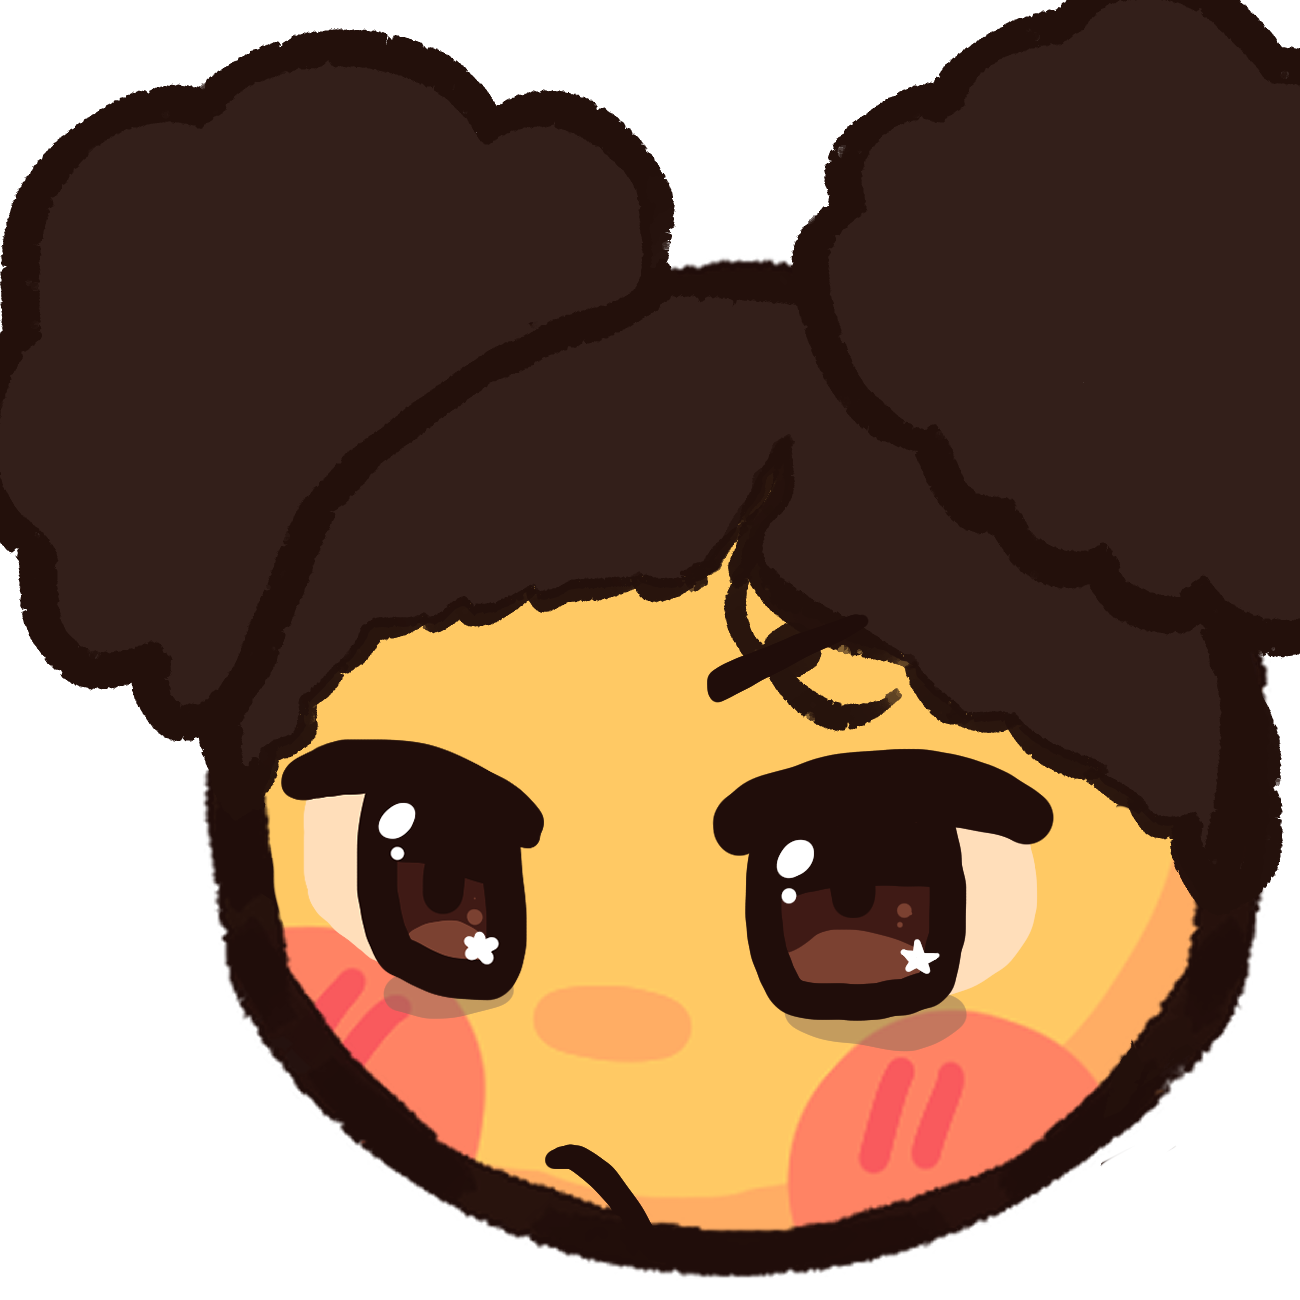 an emoji yellow person with dark afro puffs and a suspicious or displeased expression.